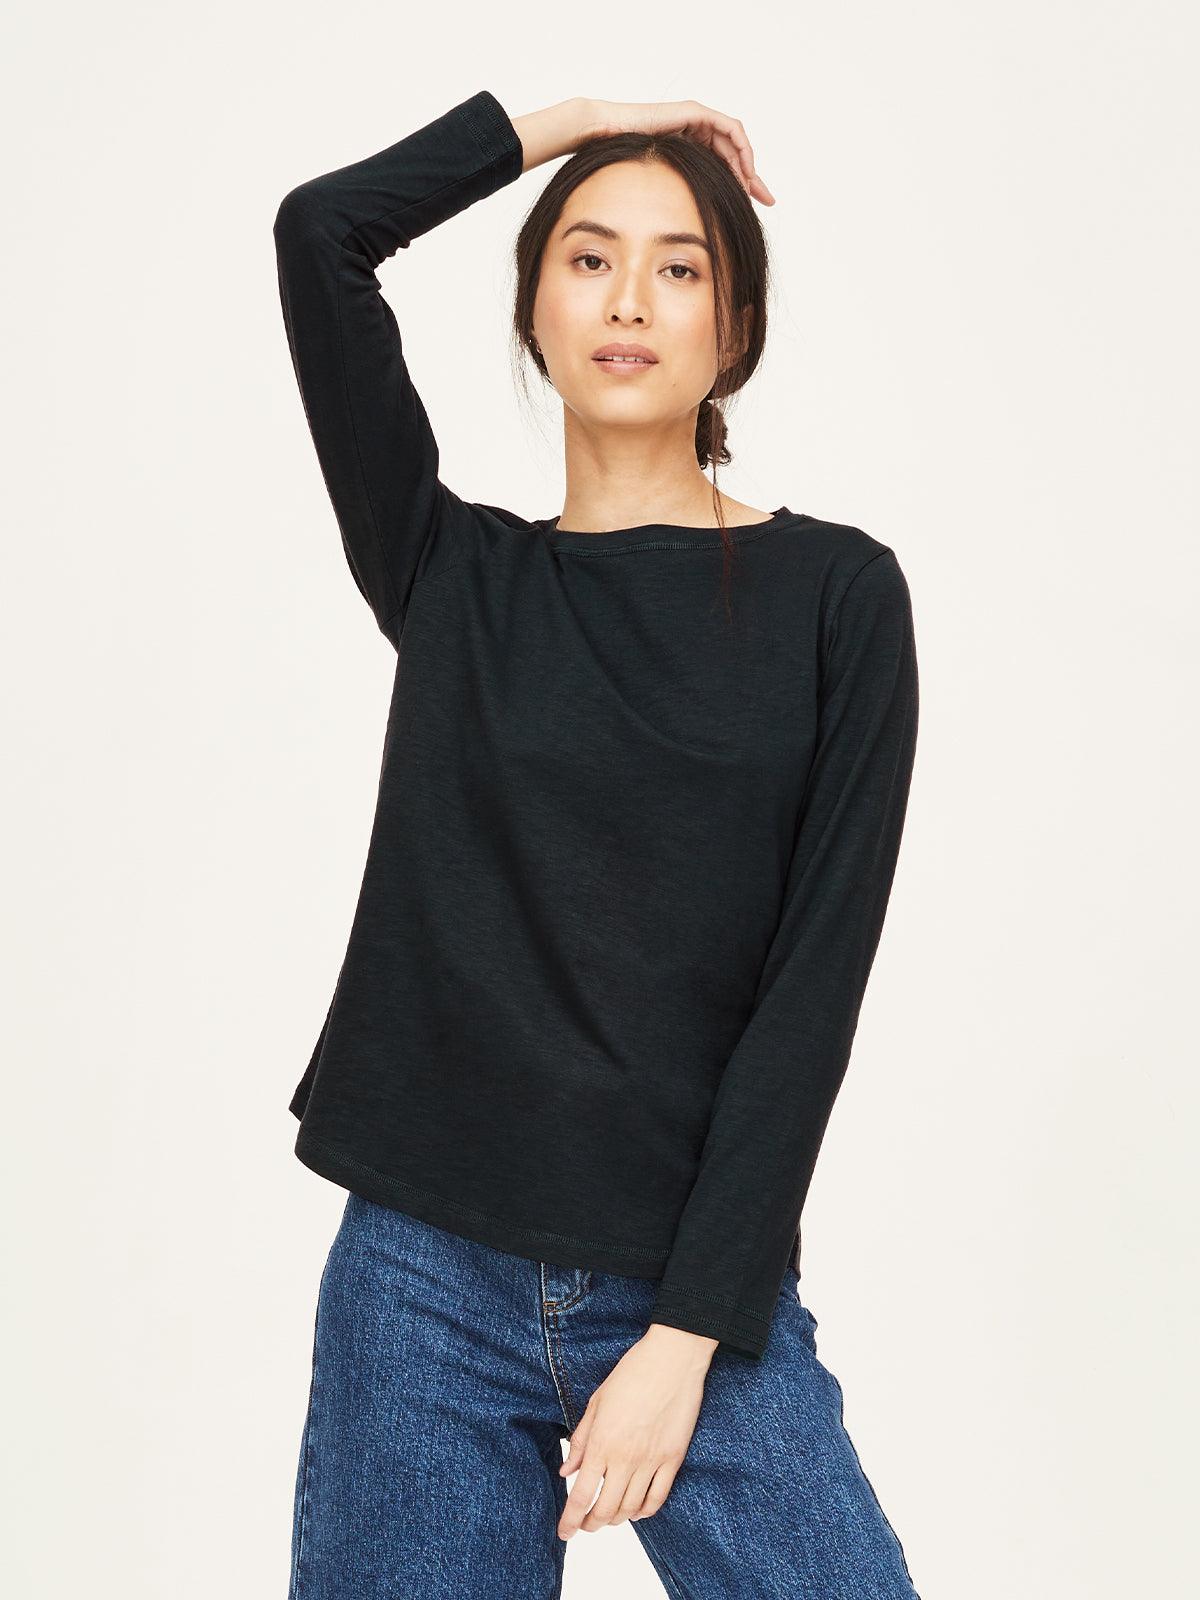 Fairtrade GOTs Organic Cotton Long Sleeve Jersey Top - Thought Clothing UK